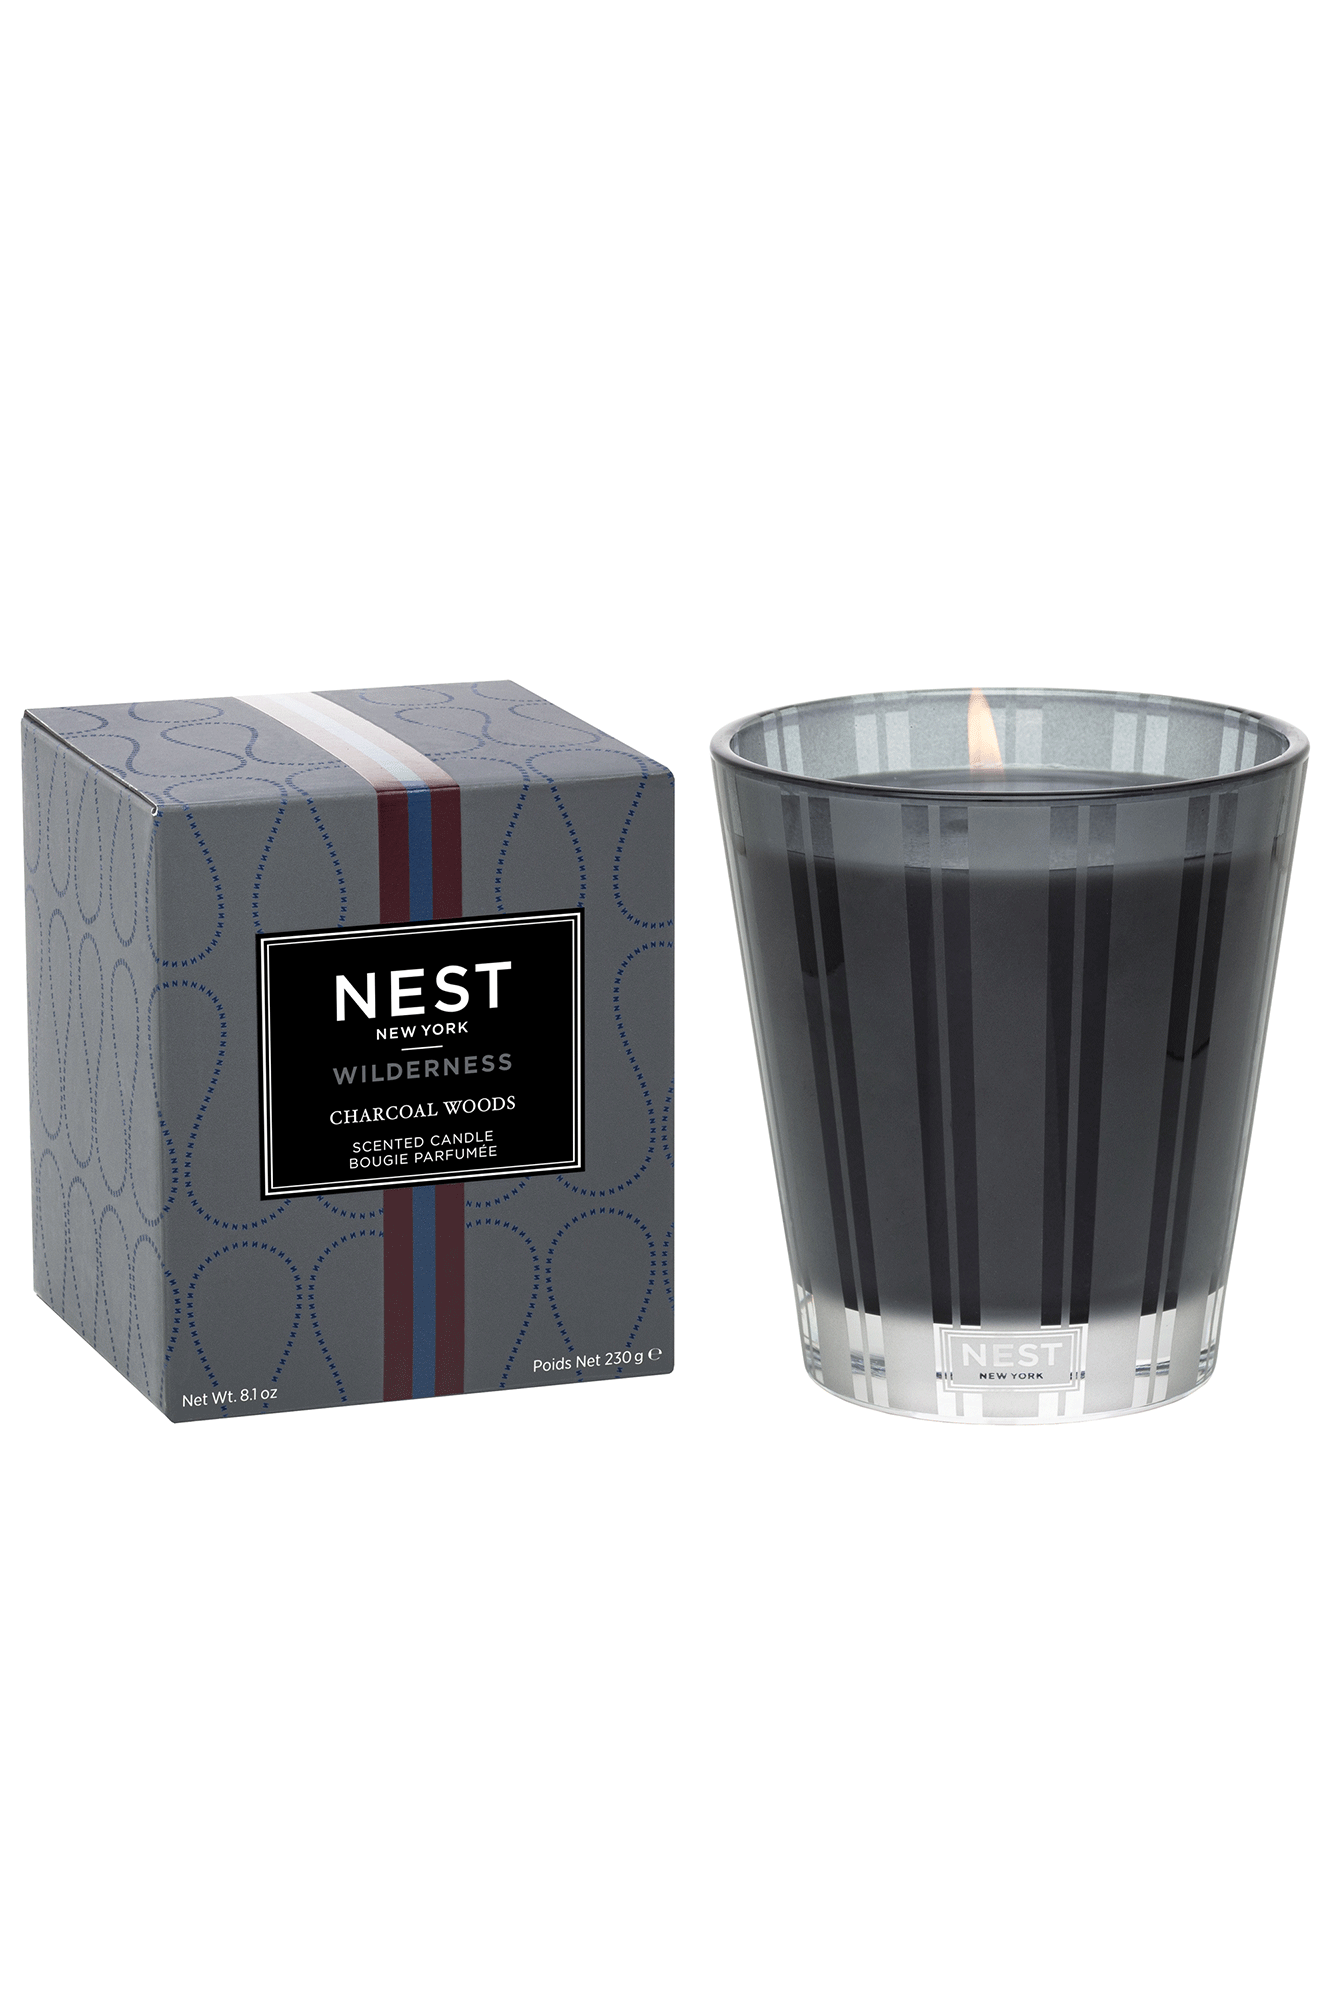 This exquisite candle from Nest is composed of heady notes of smoky labdanum, patchouli, and cedarwood, with a hint of black truffle and charred birchwood. Charcoal Woods Classic Candle adds a mysterious and inviting ambience to any home.